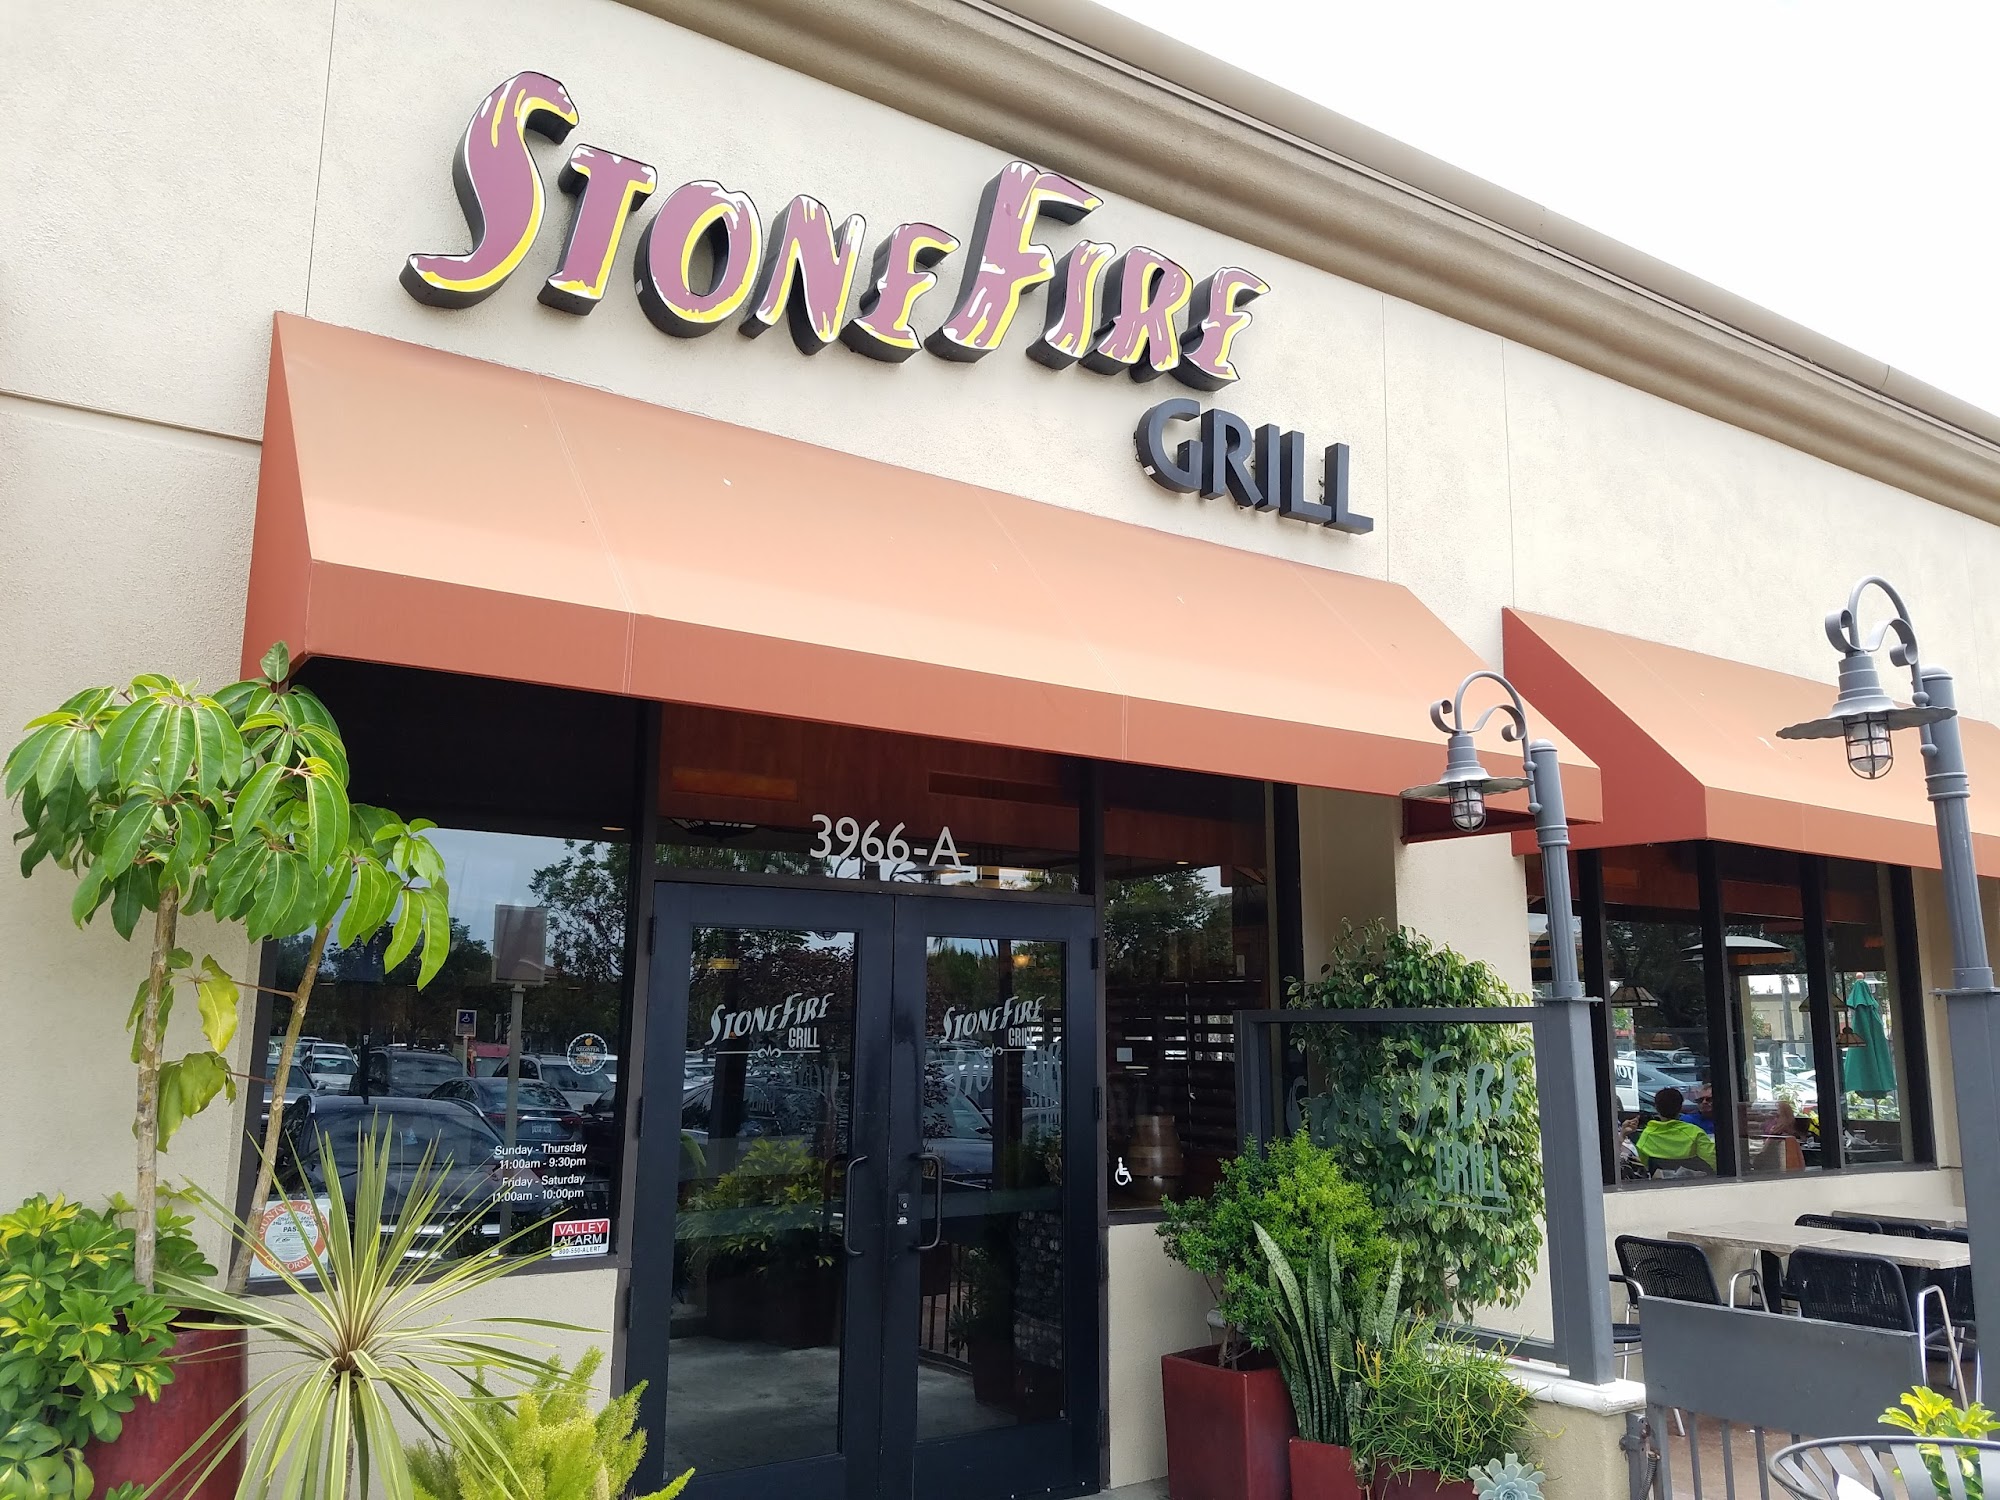 STONEFIRE Grill